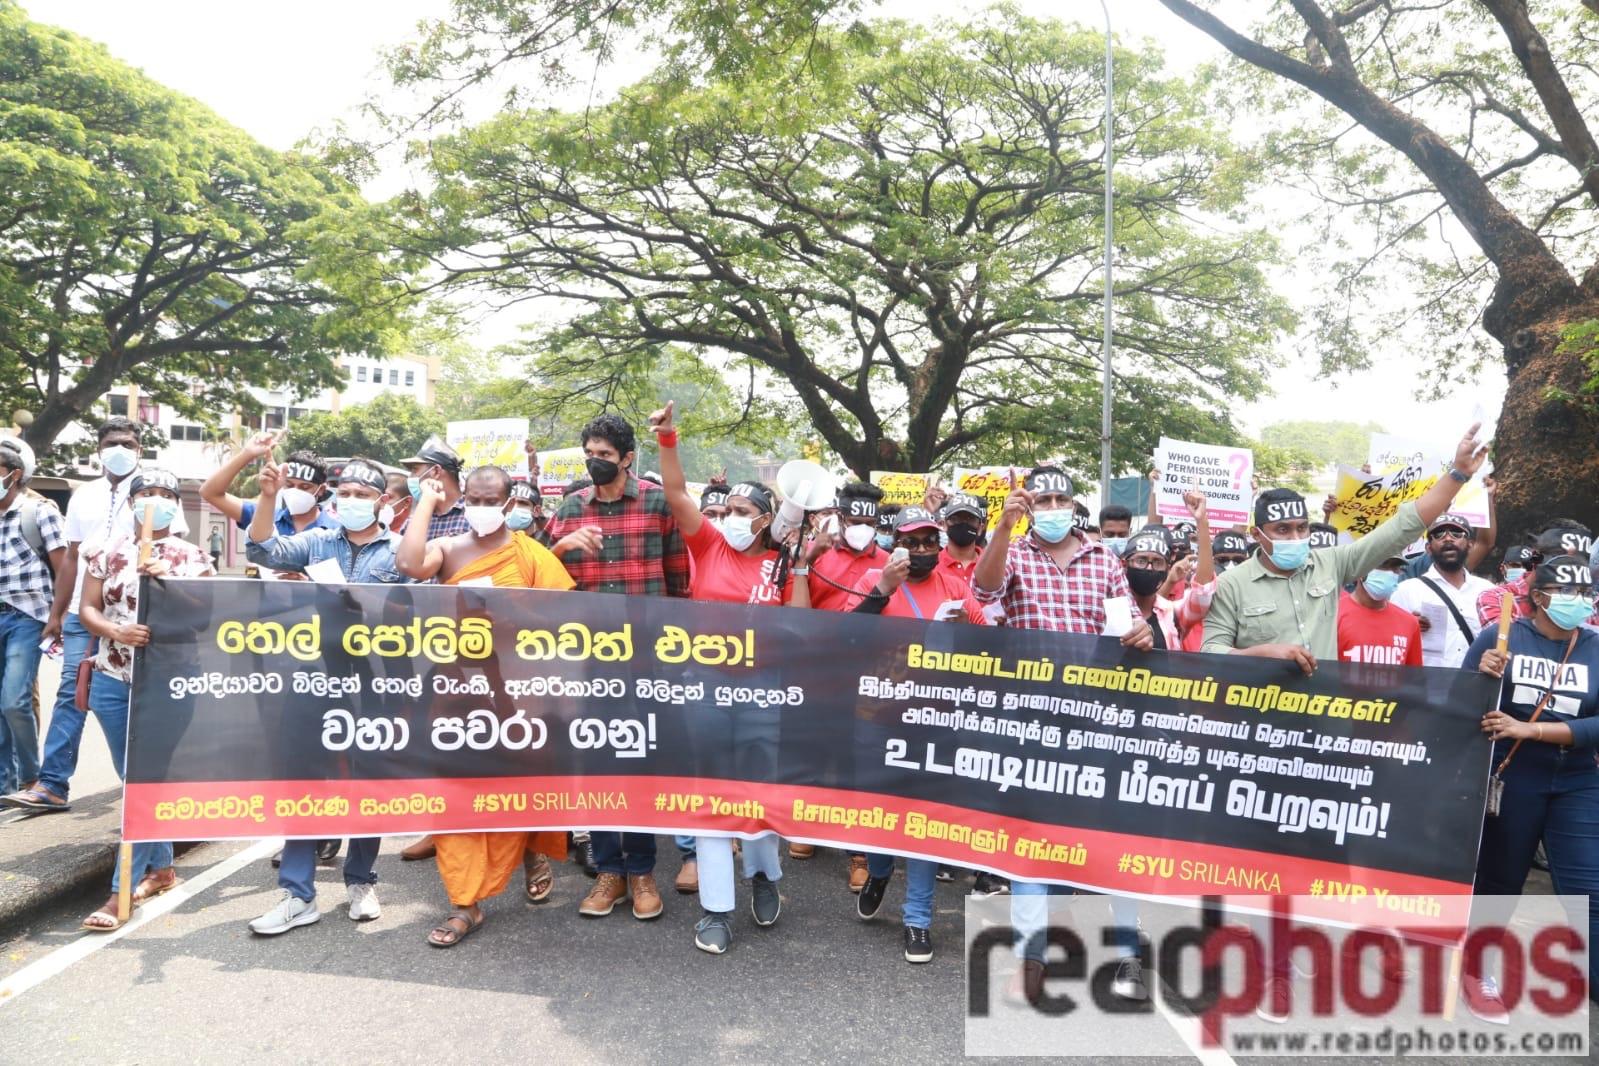 JVP affiliated unions protests against the government  - Read Photos